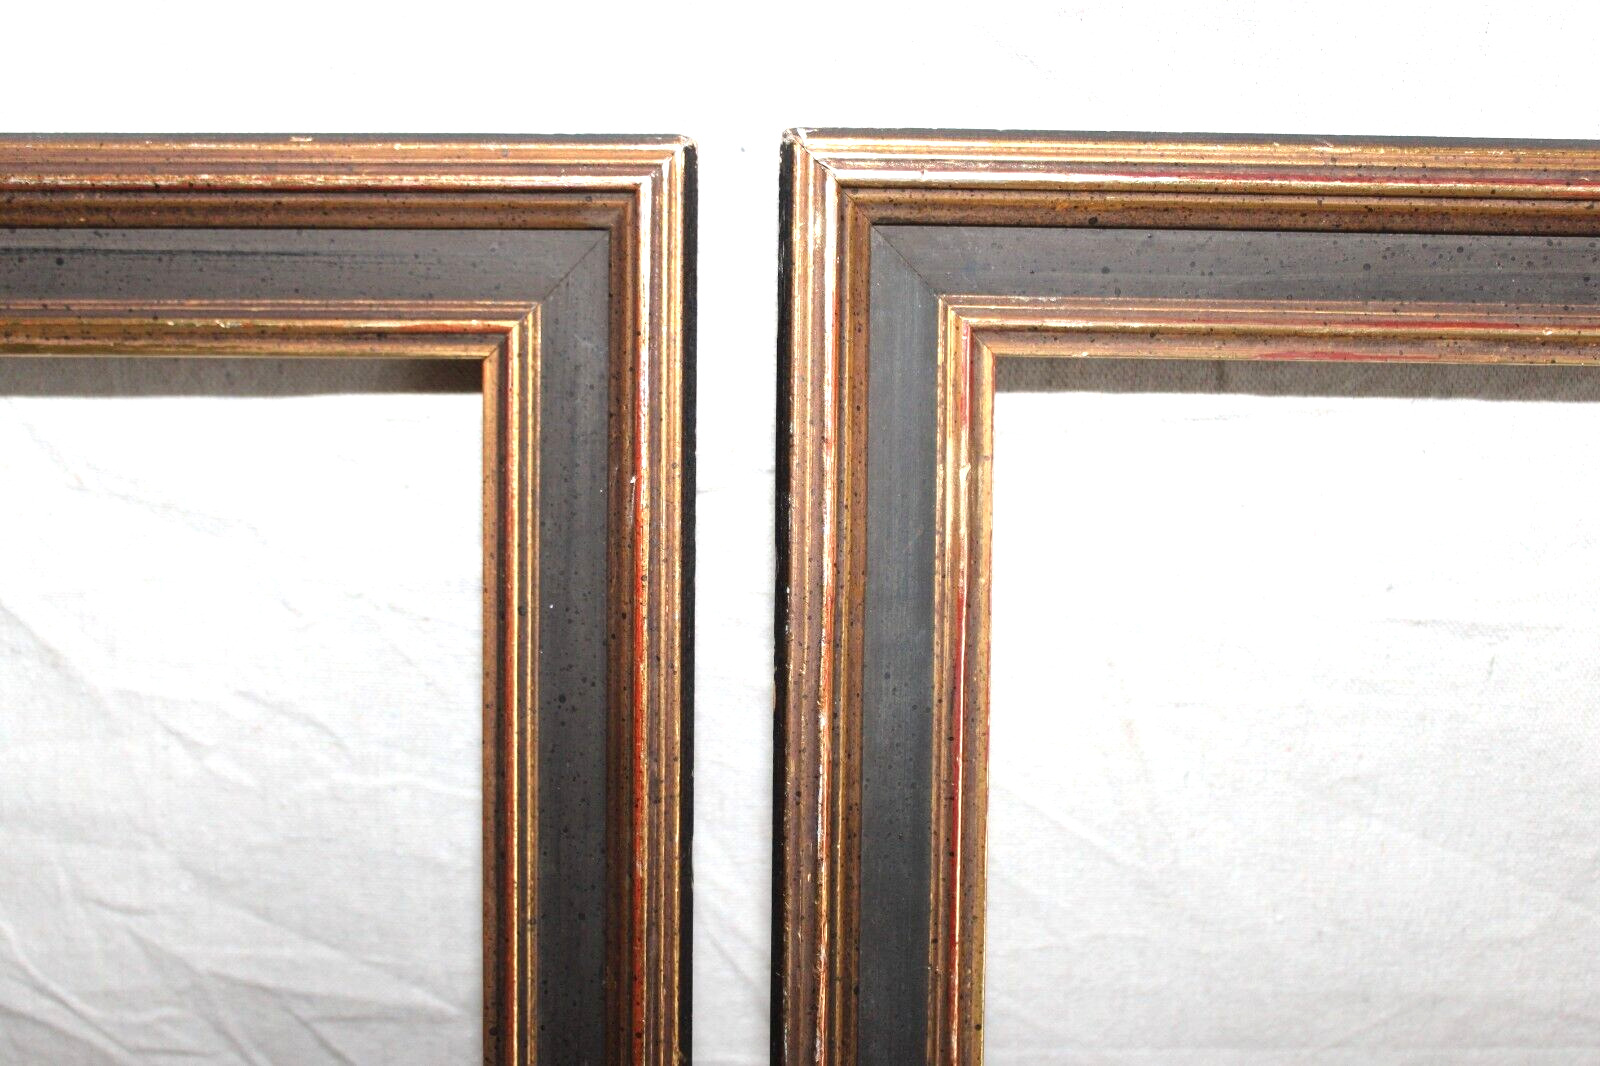 VINTAGE FITS 10 X 12 MID CENTURY GOLD GILT BLACK PICTURE FRAME WOOD PAIR AVAIL.